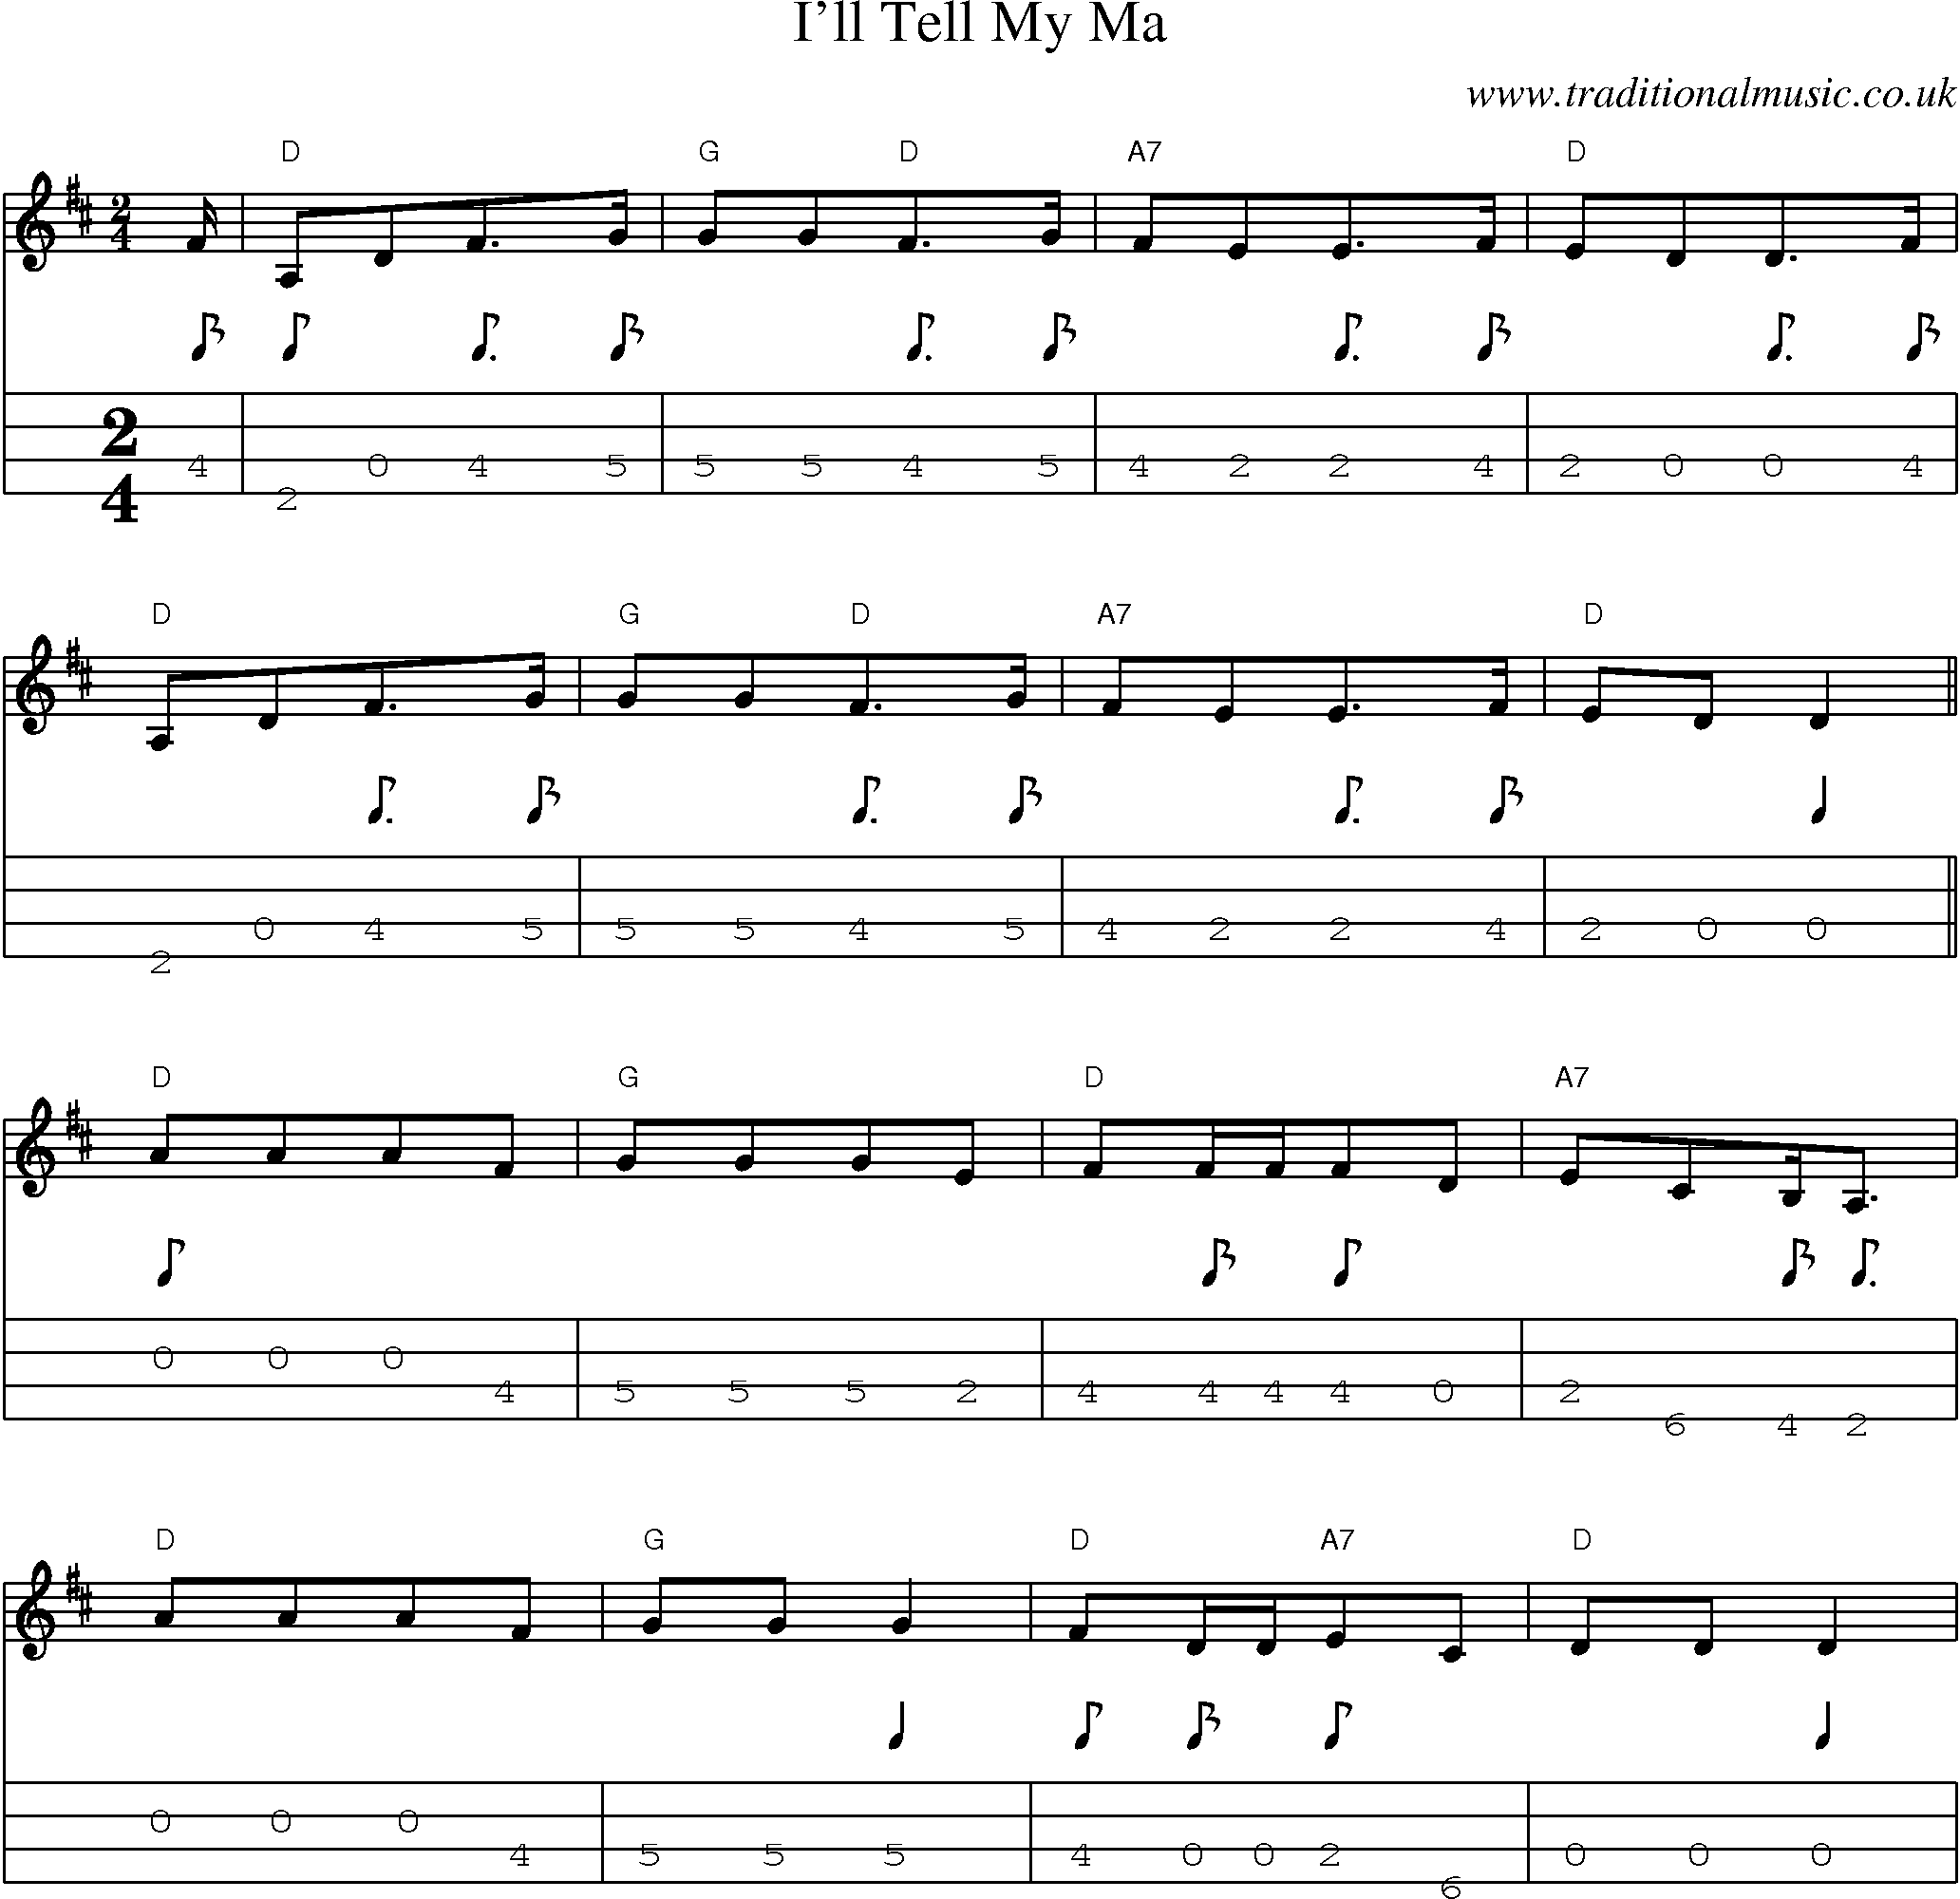 Music Score and Mandolin Tabs for Ill Tell My Ma